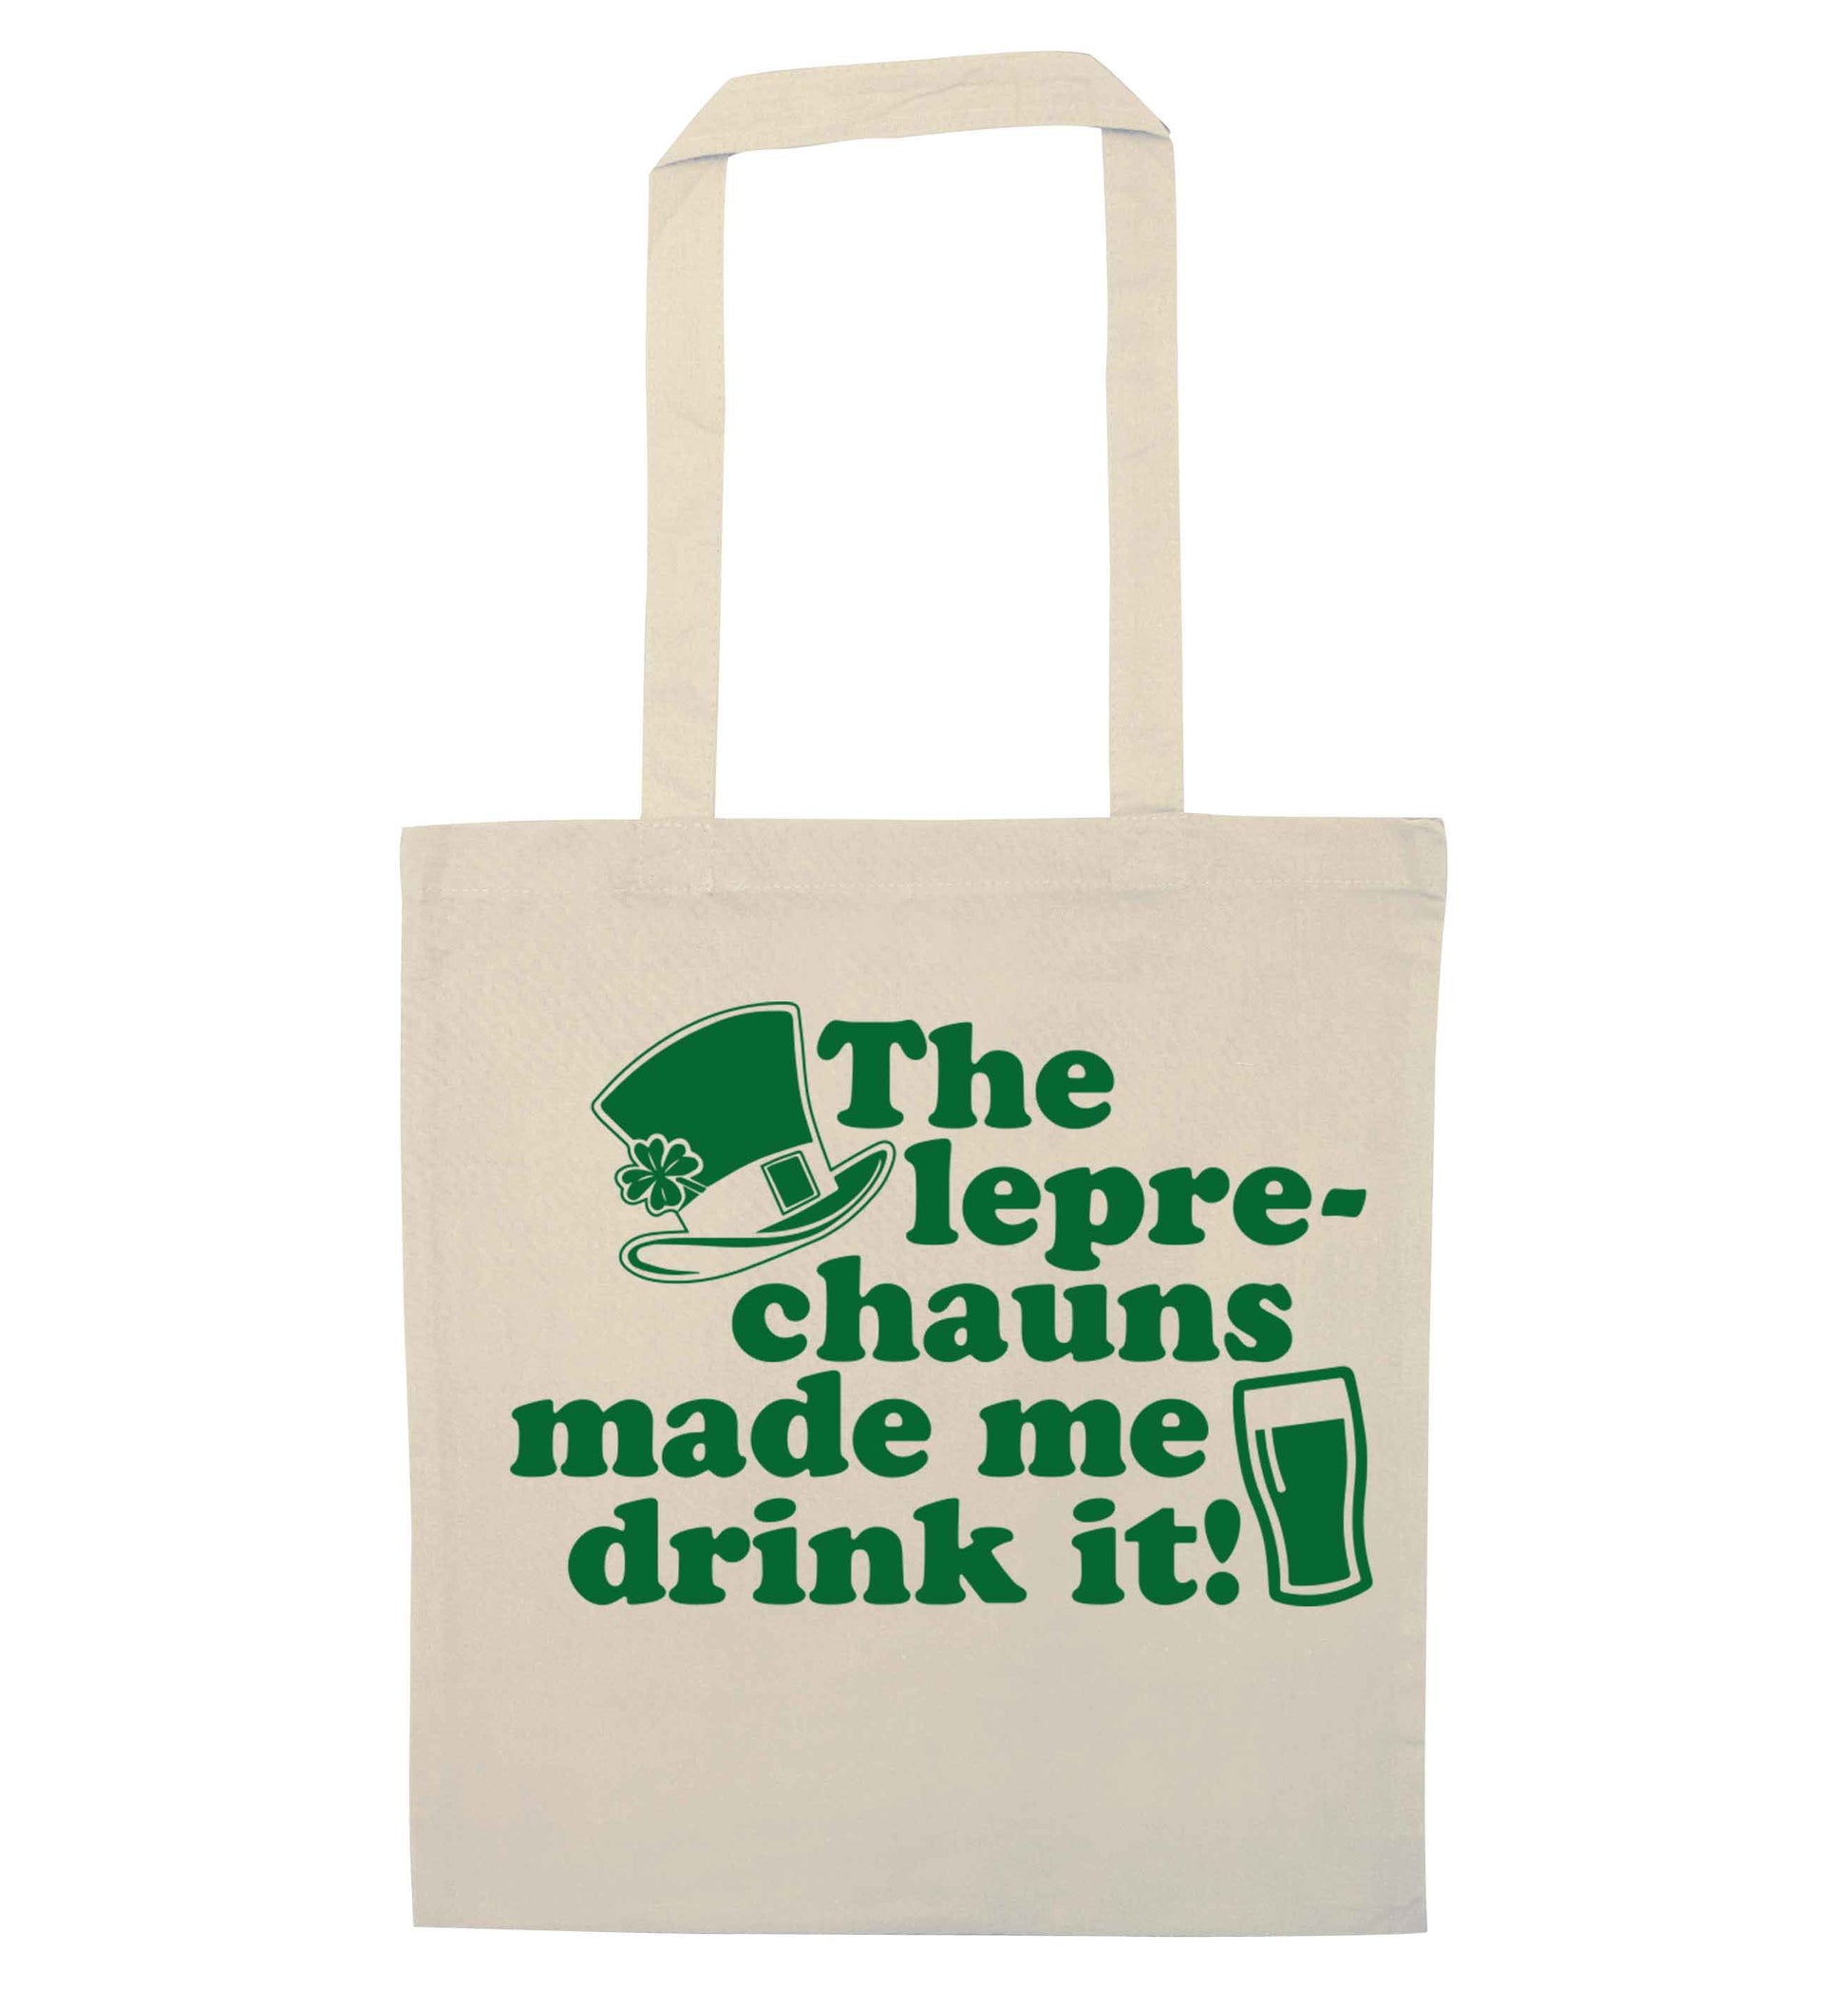 The leprechauns made me drink it natural tote bag